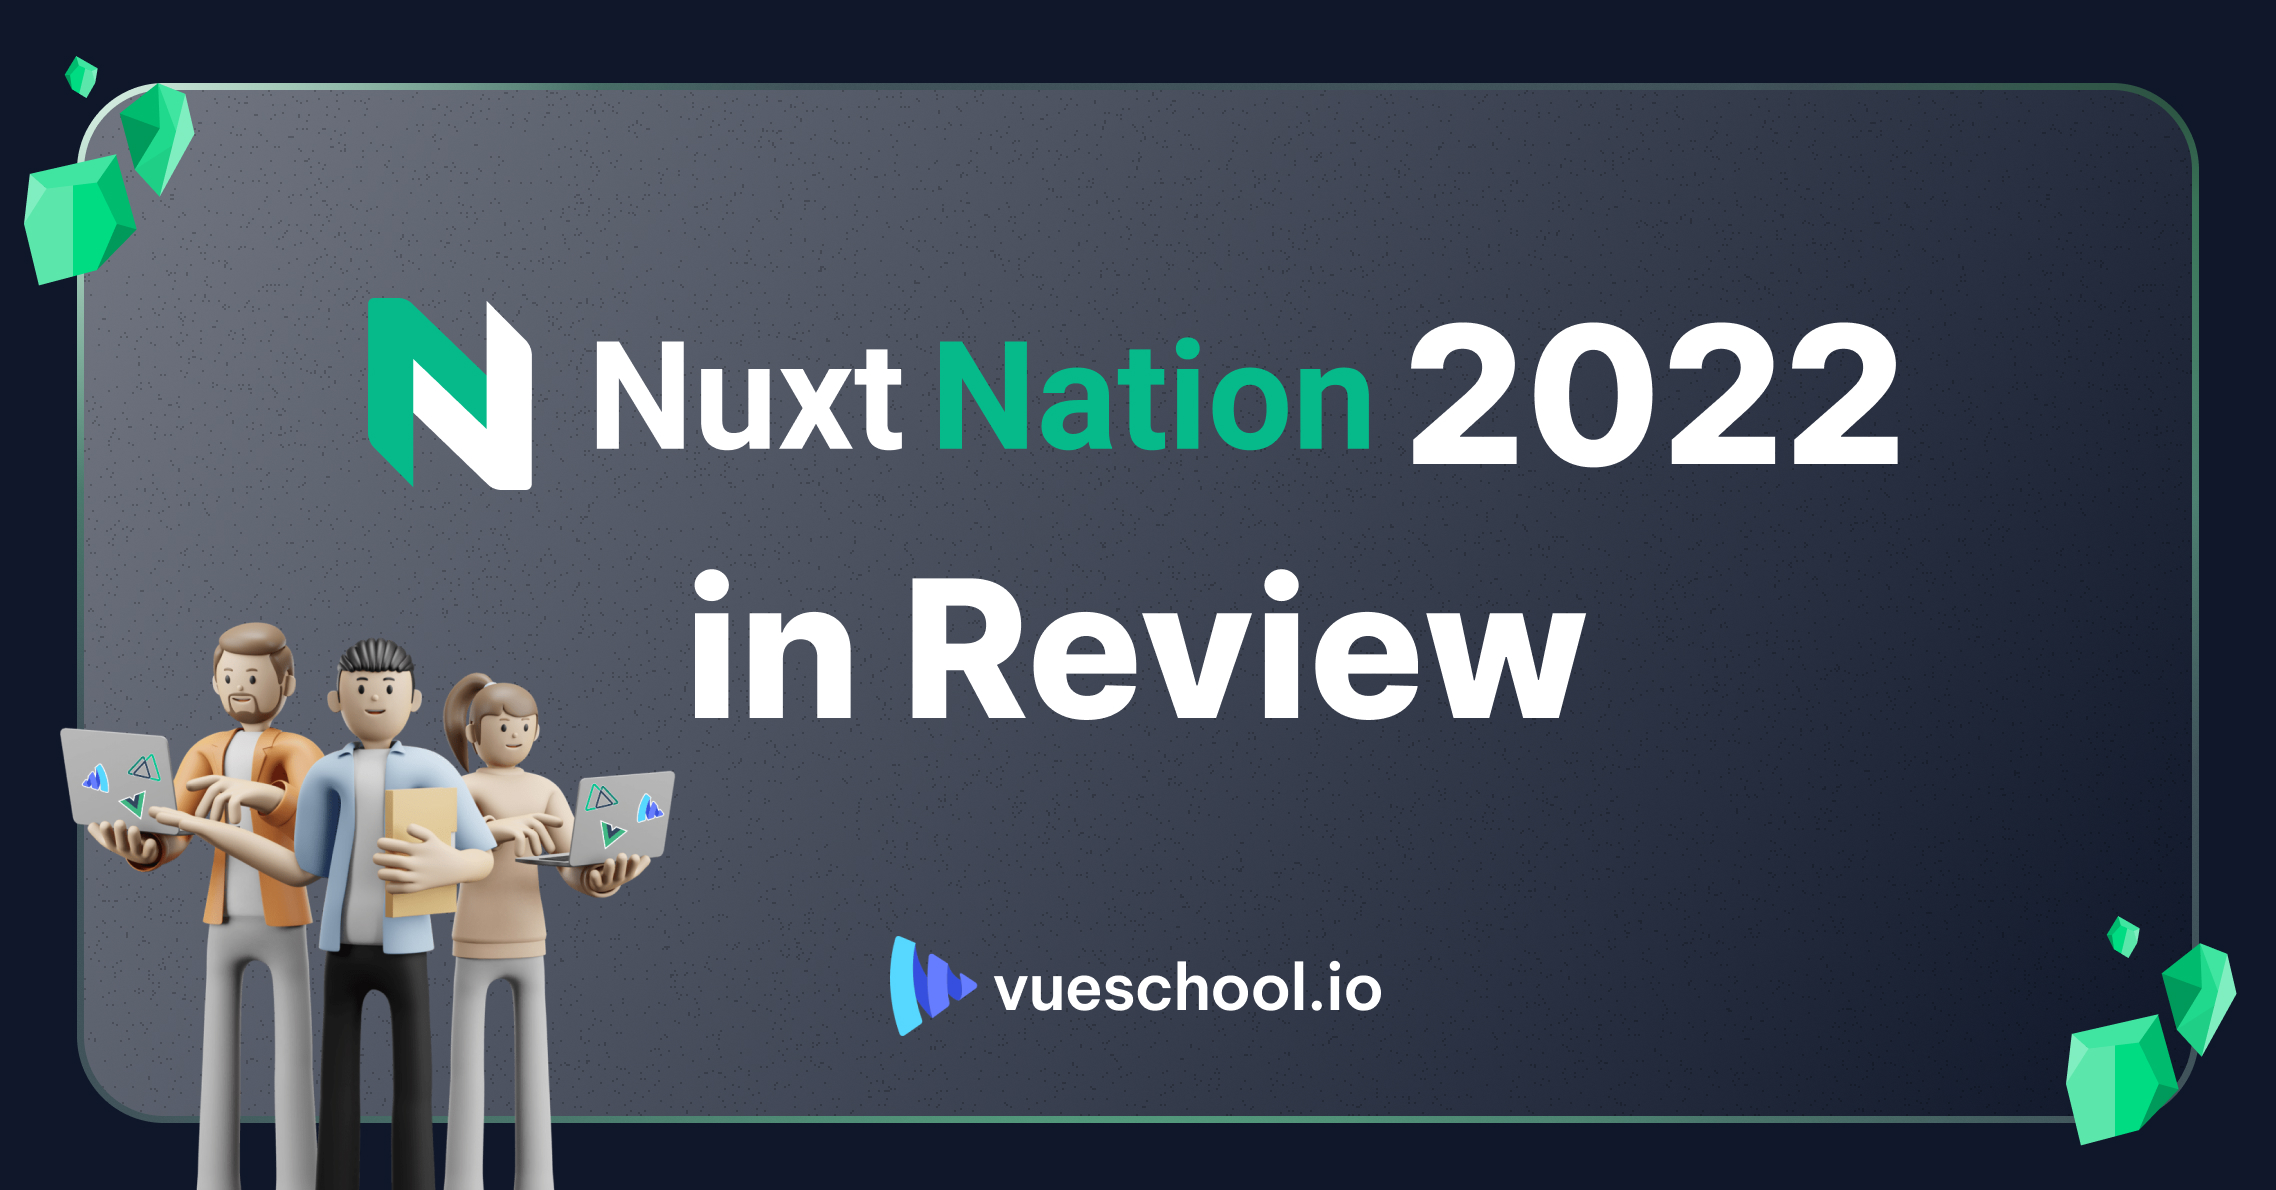 Nuxt Nation 2022 in Review